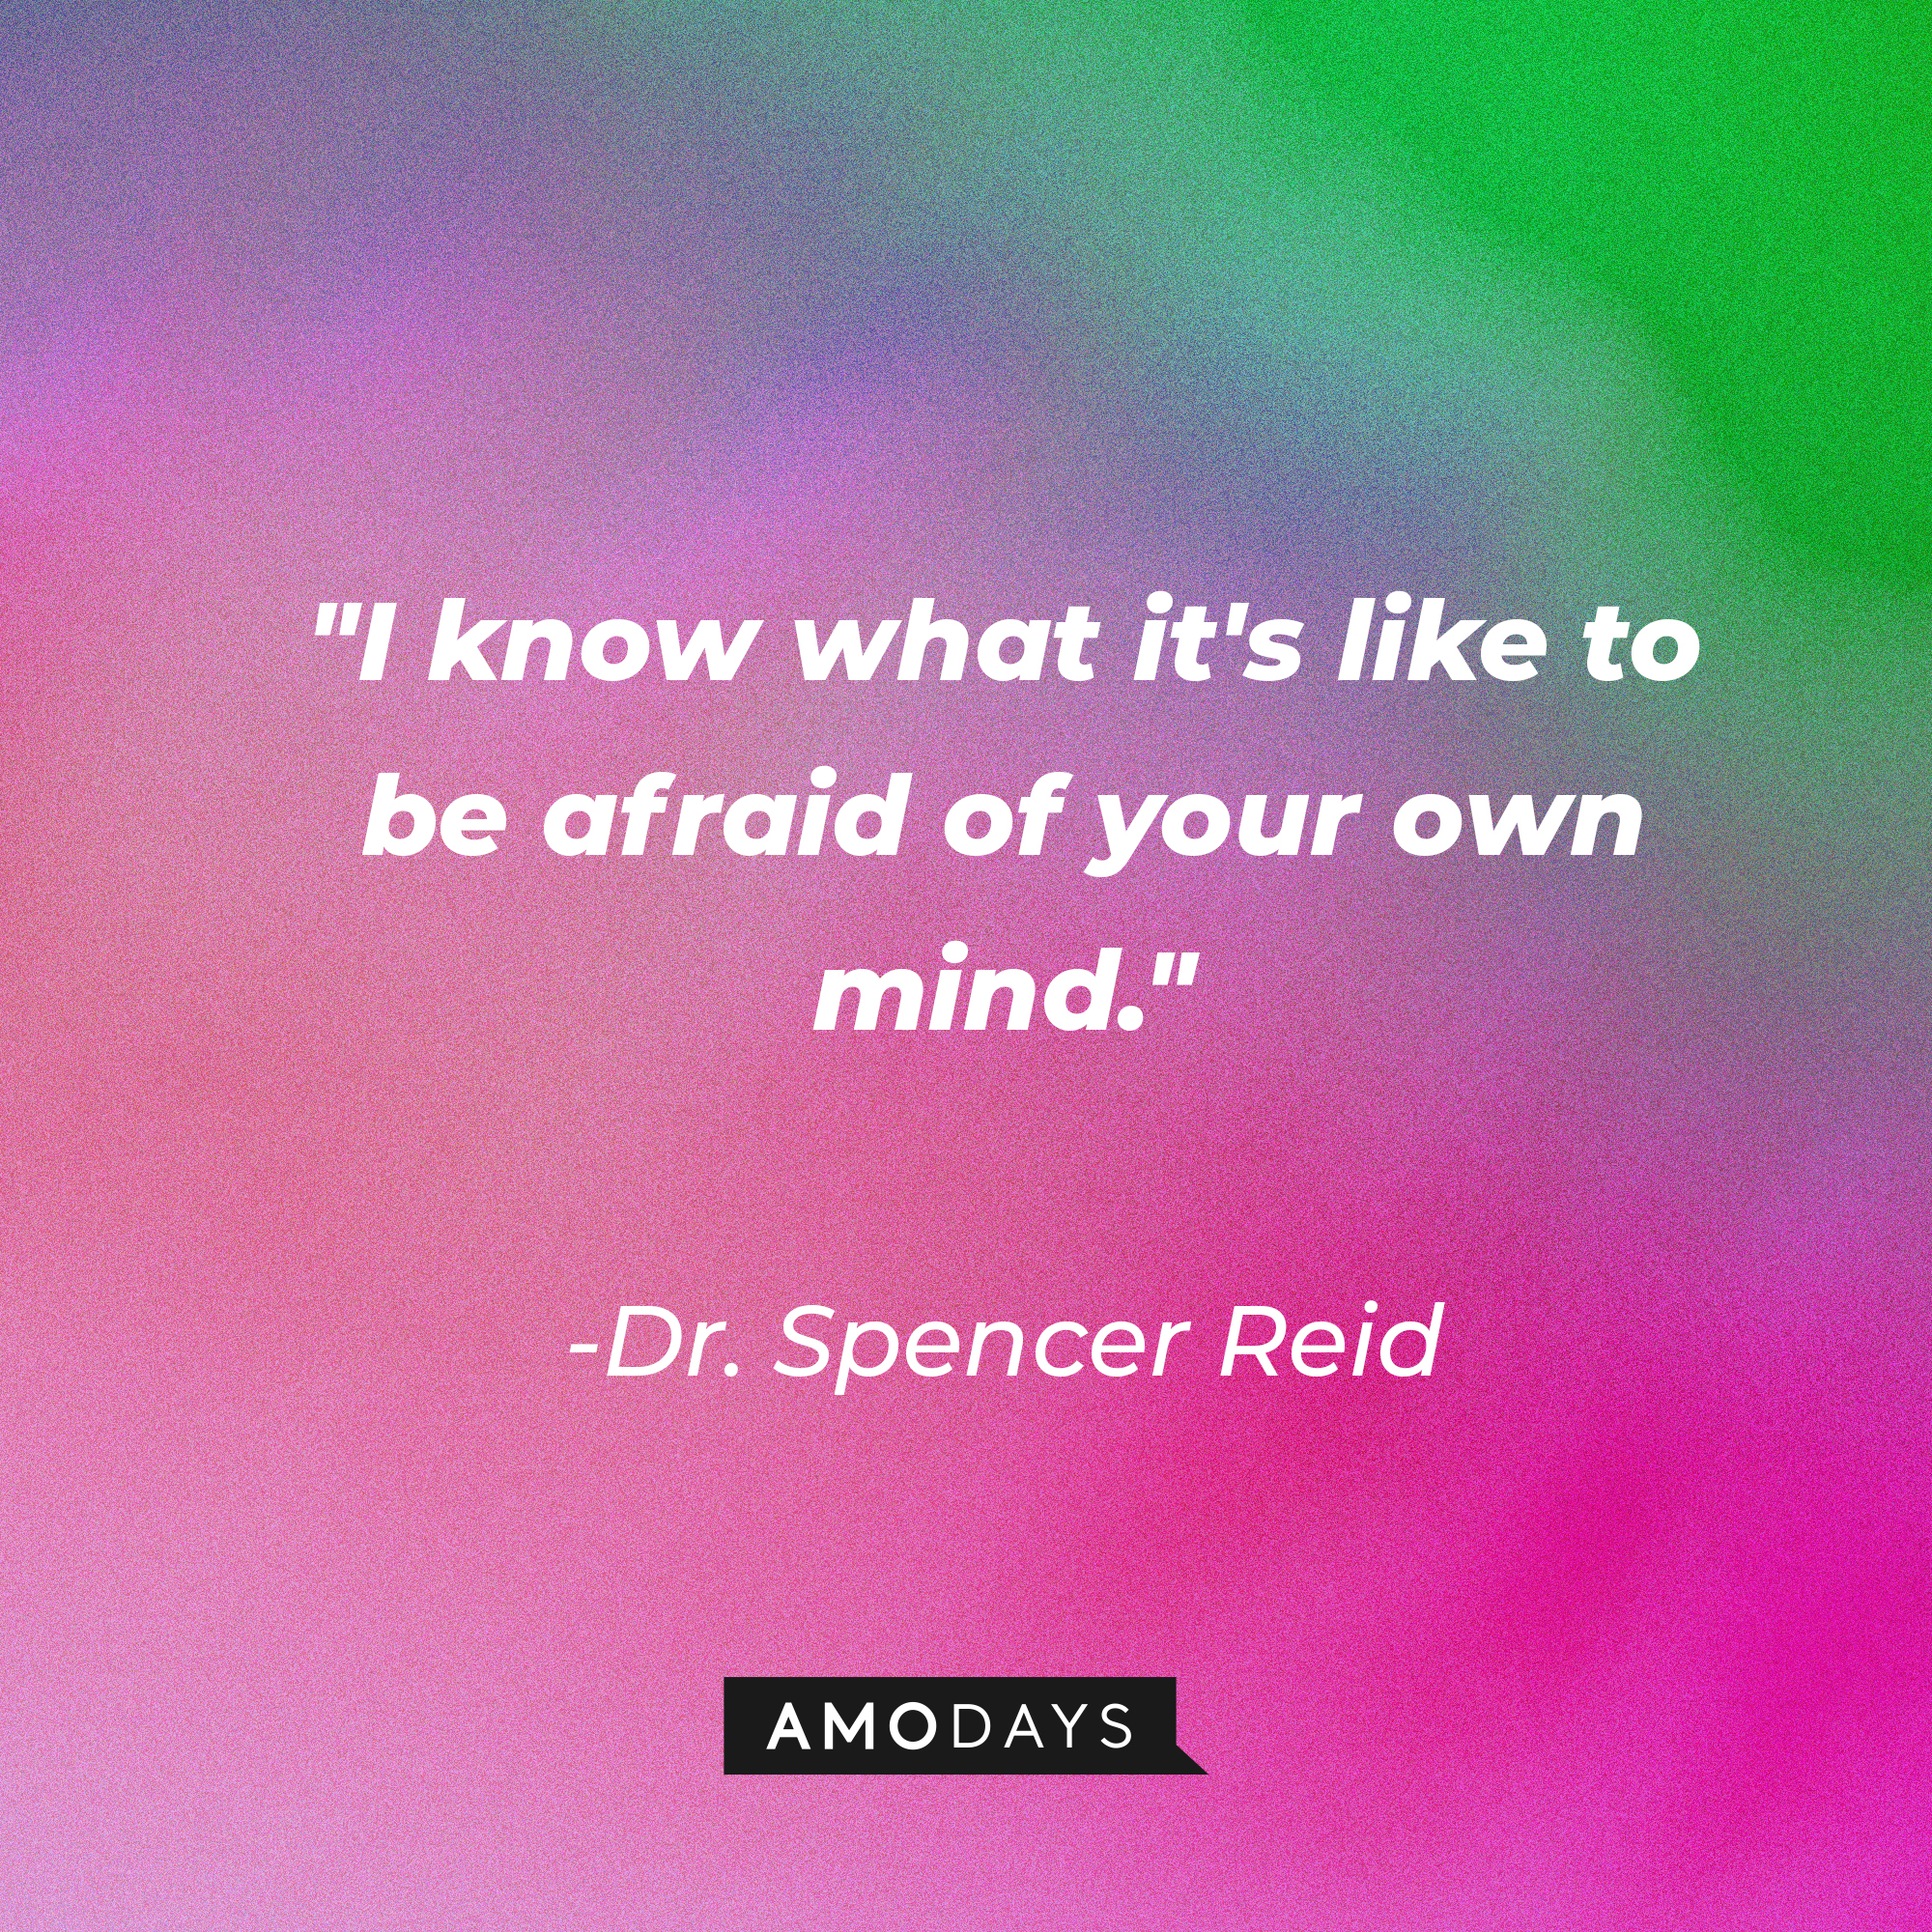 Dr. Spencer Reid's quote: "I know what it's like to be afraid of your own mind." | Source: AmoDays